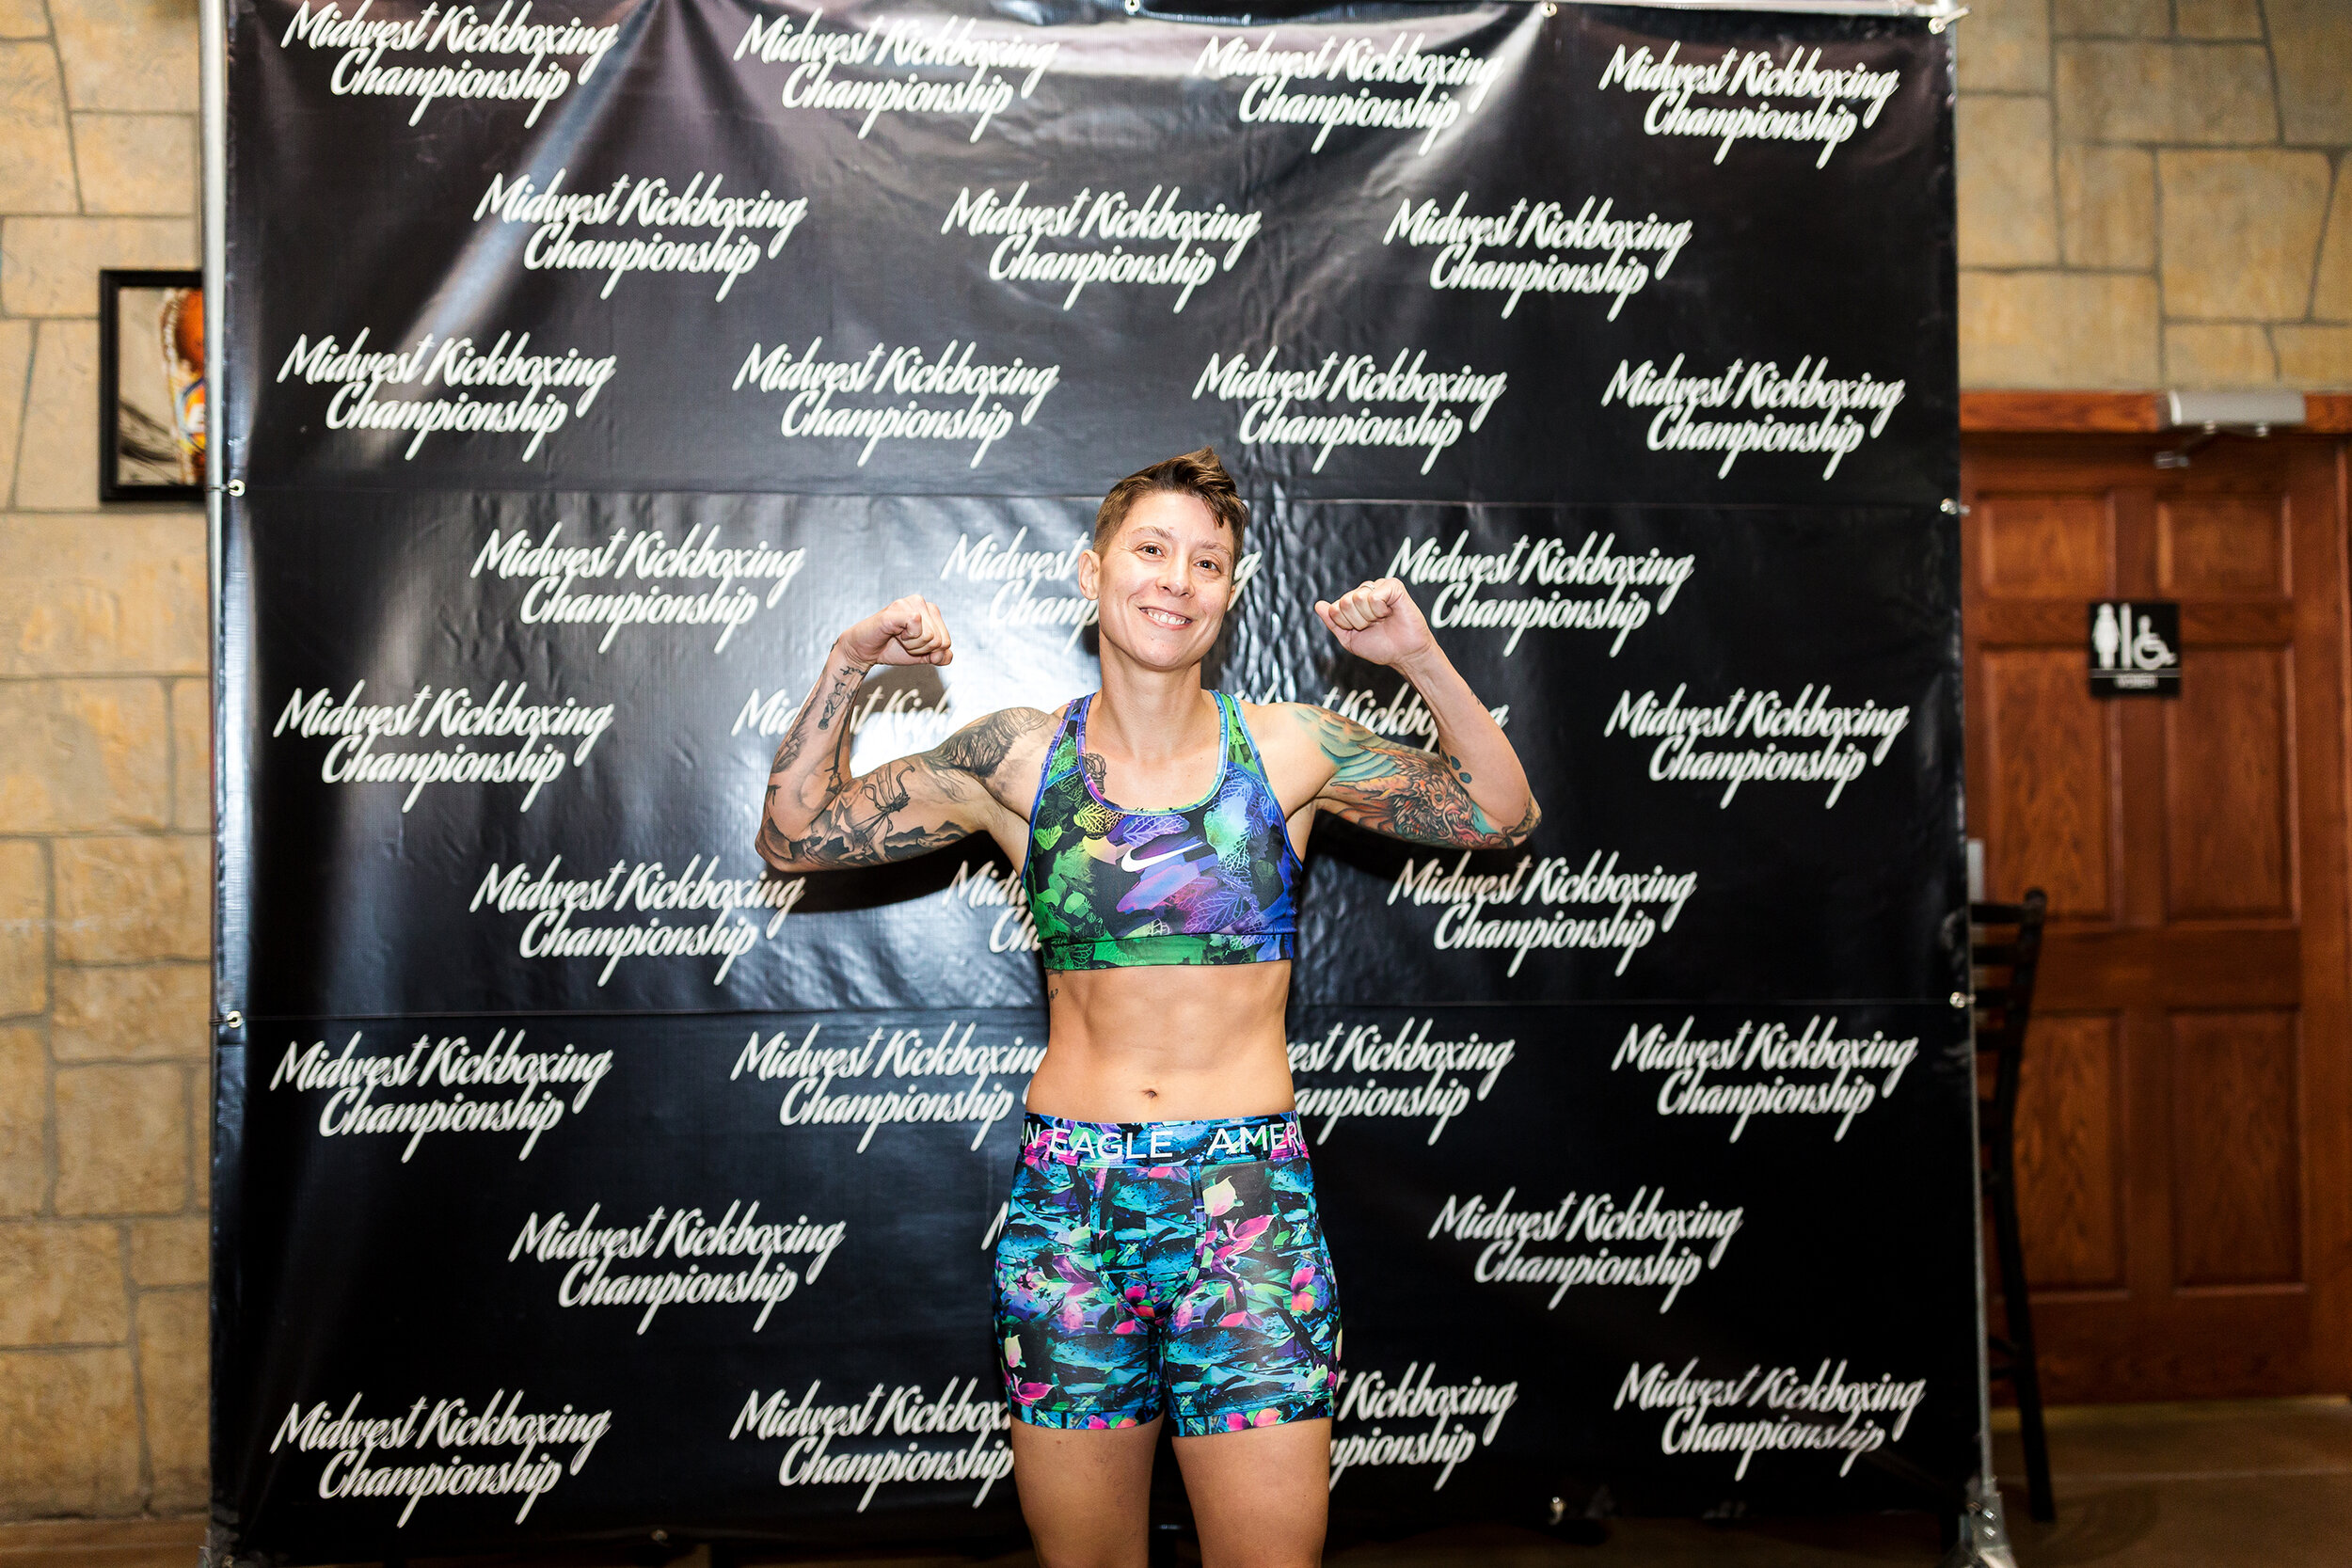  Kickboxer Liz Helton poses for photos after weighing in for the 130lb weight class before the Midwest Kickboxing Championship at Aces and Eights Saloon in Cedar Rapids, IA on Aug. 17, 2018. 